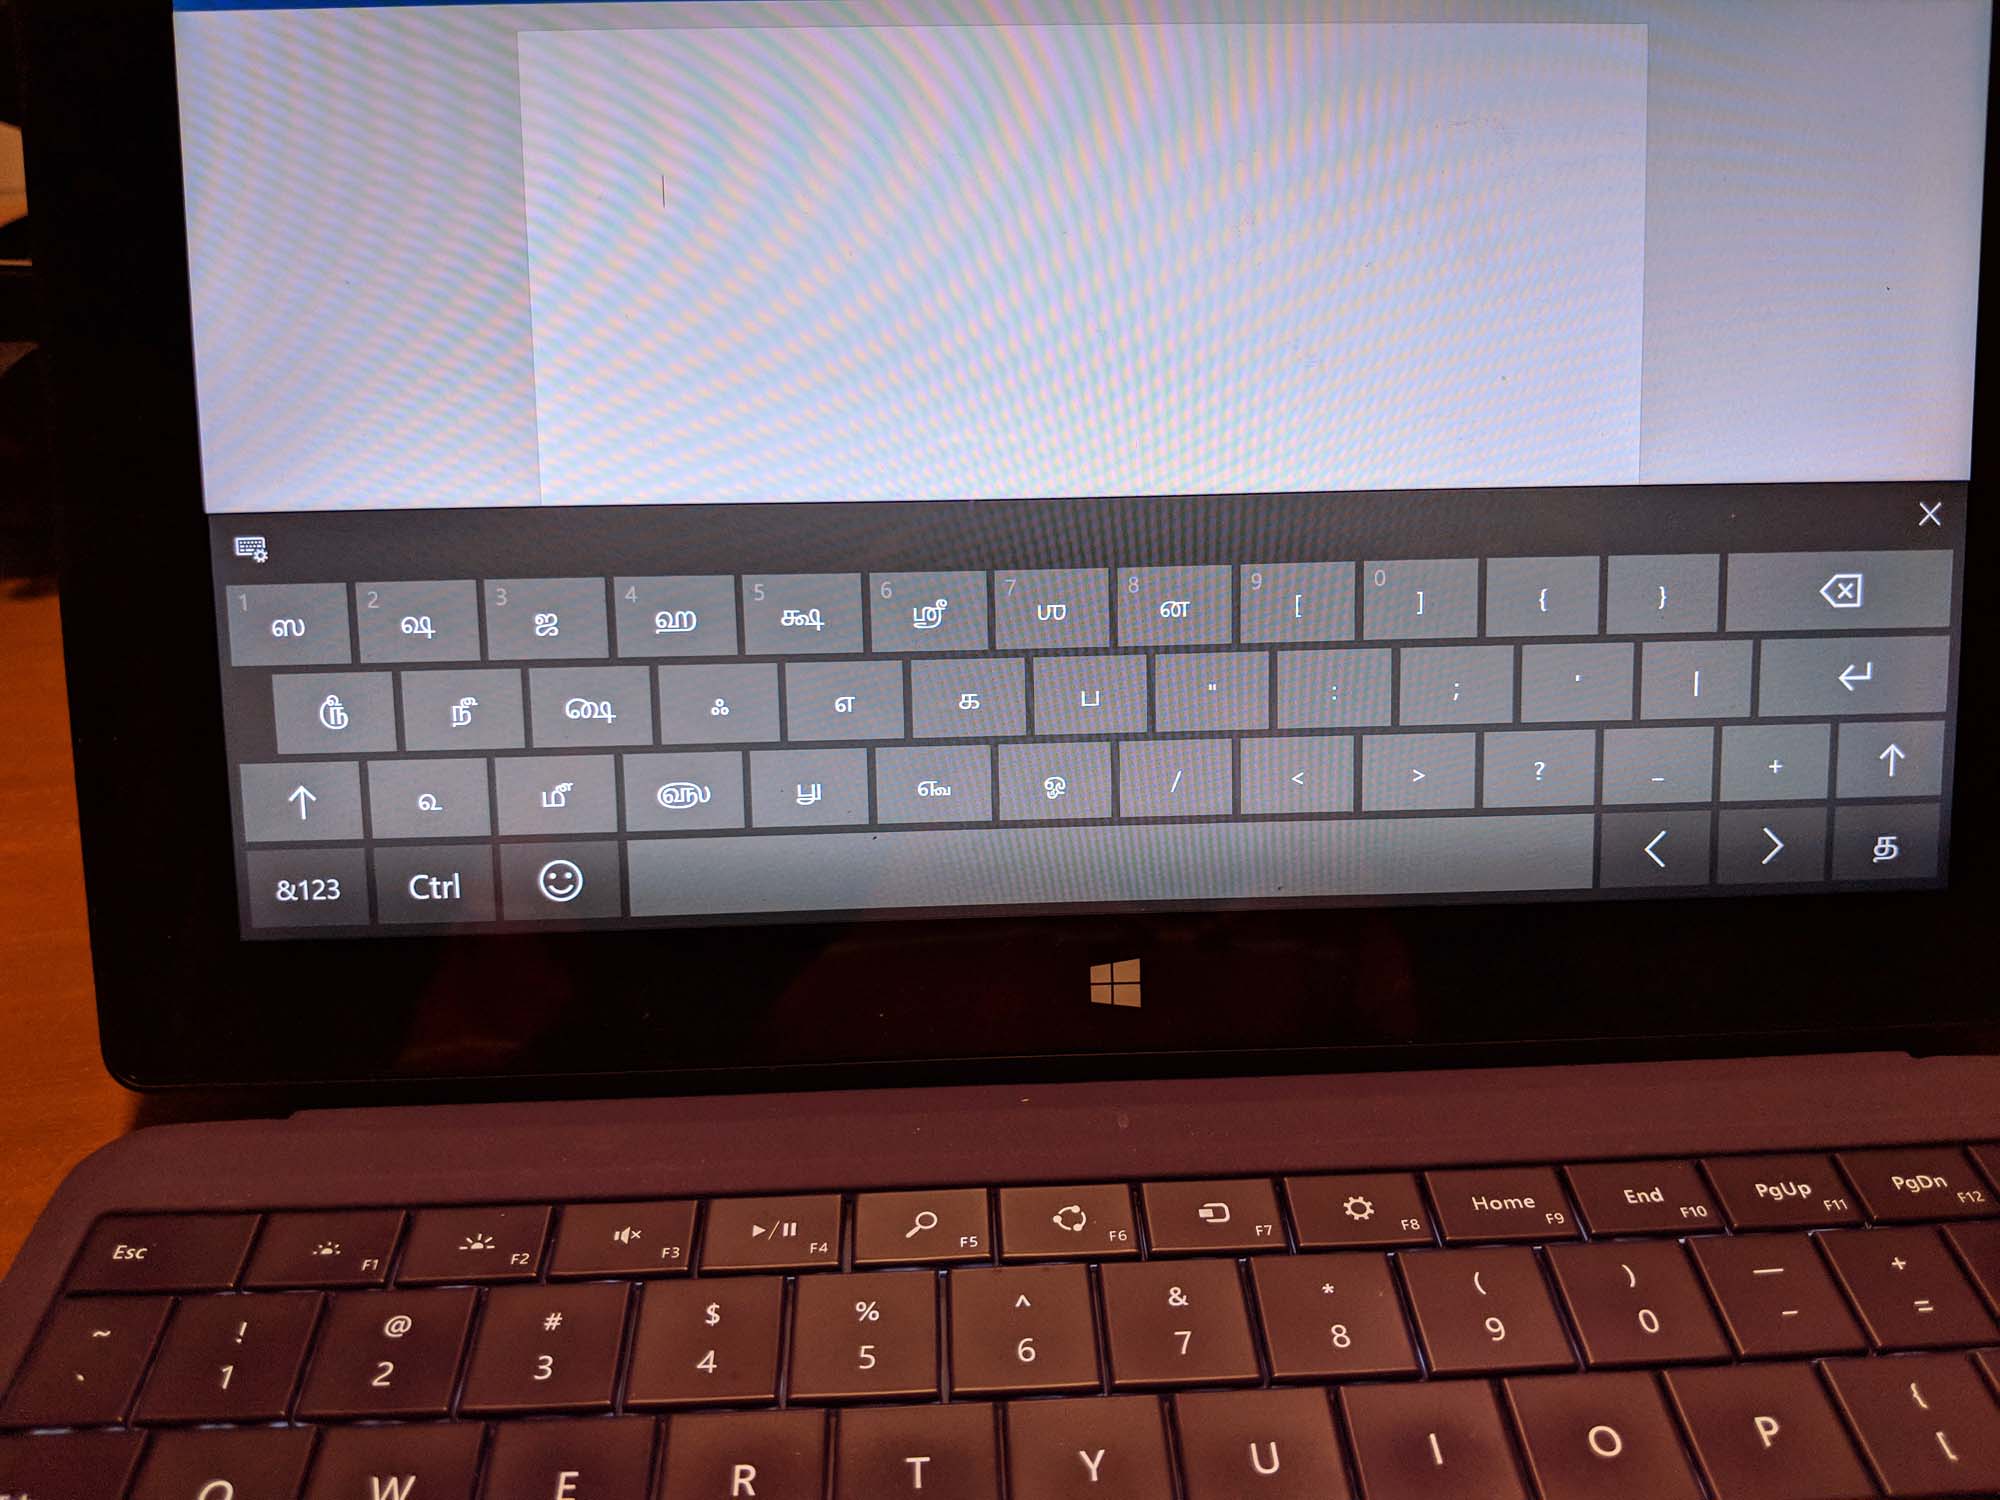 Tamil Letters (Grantha) that appear on pressing shift-key. Tamil 99 Keyboard layout with Windows 10